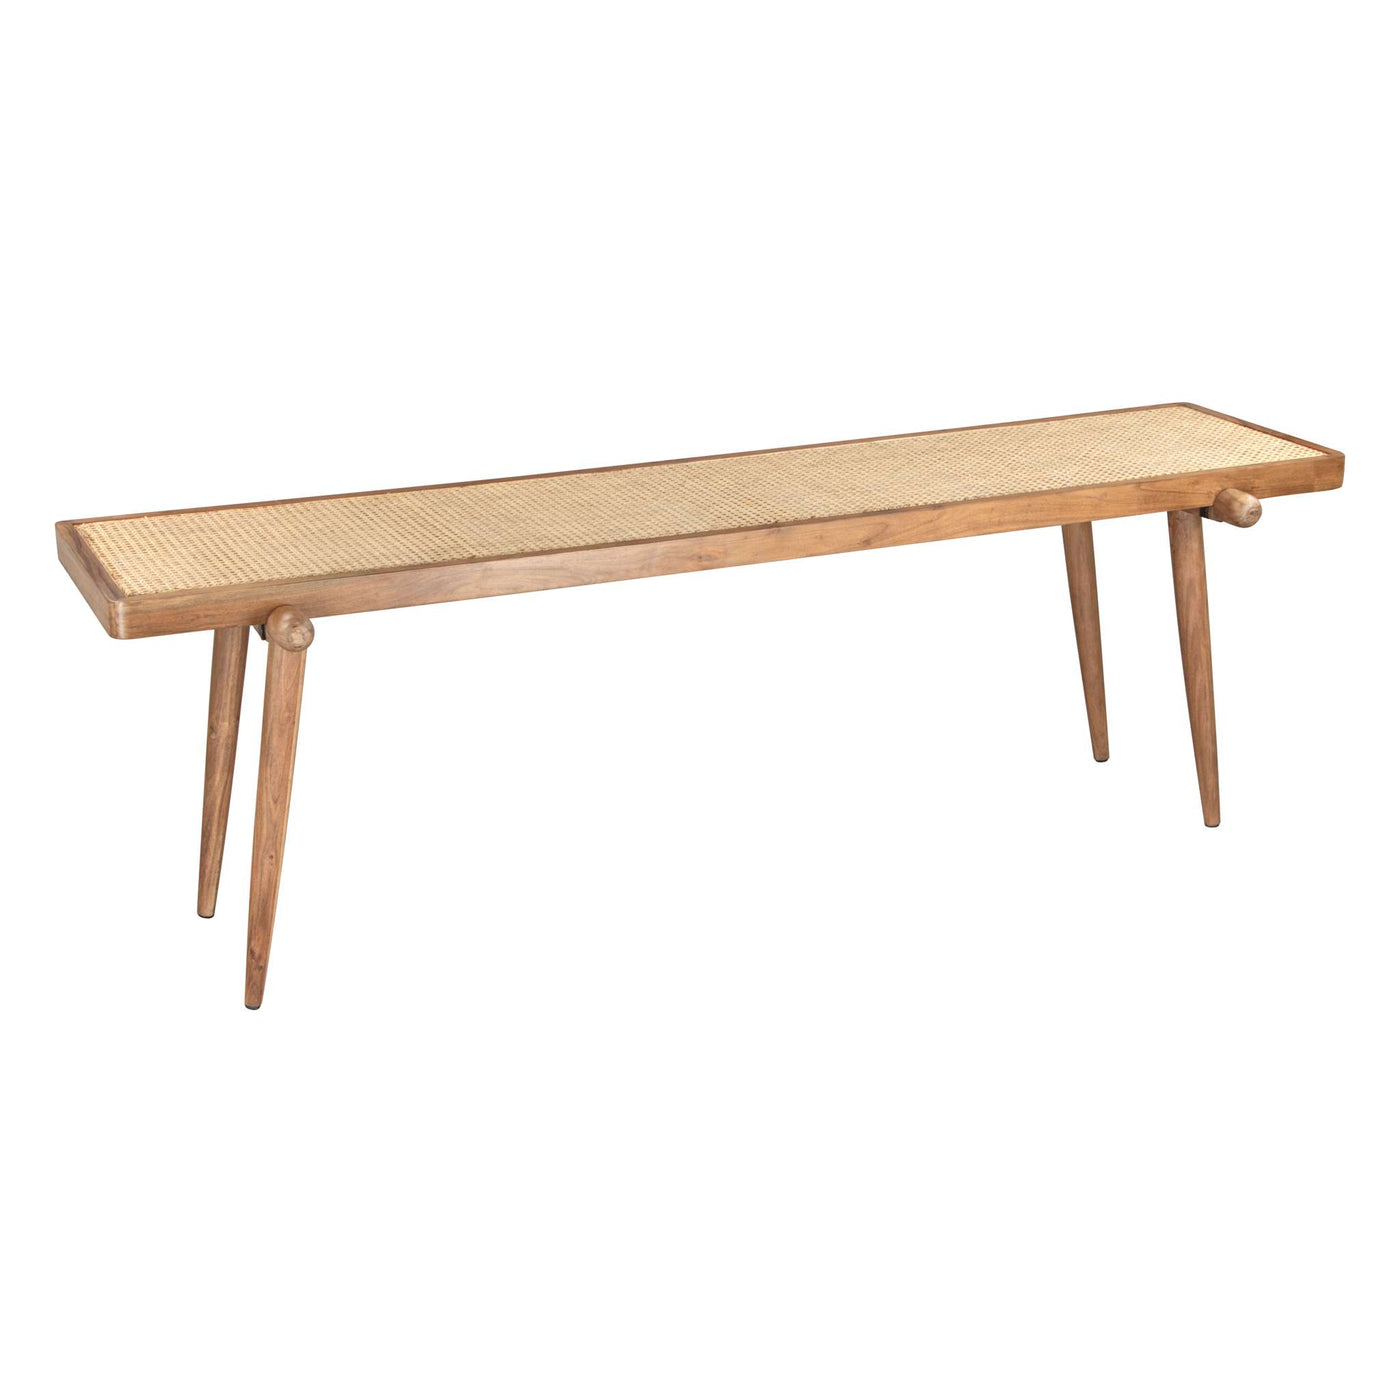 Zuo Mod Olyphant Console Table